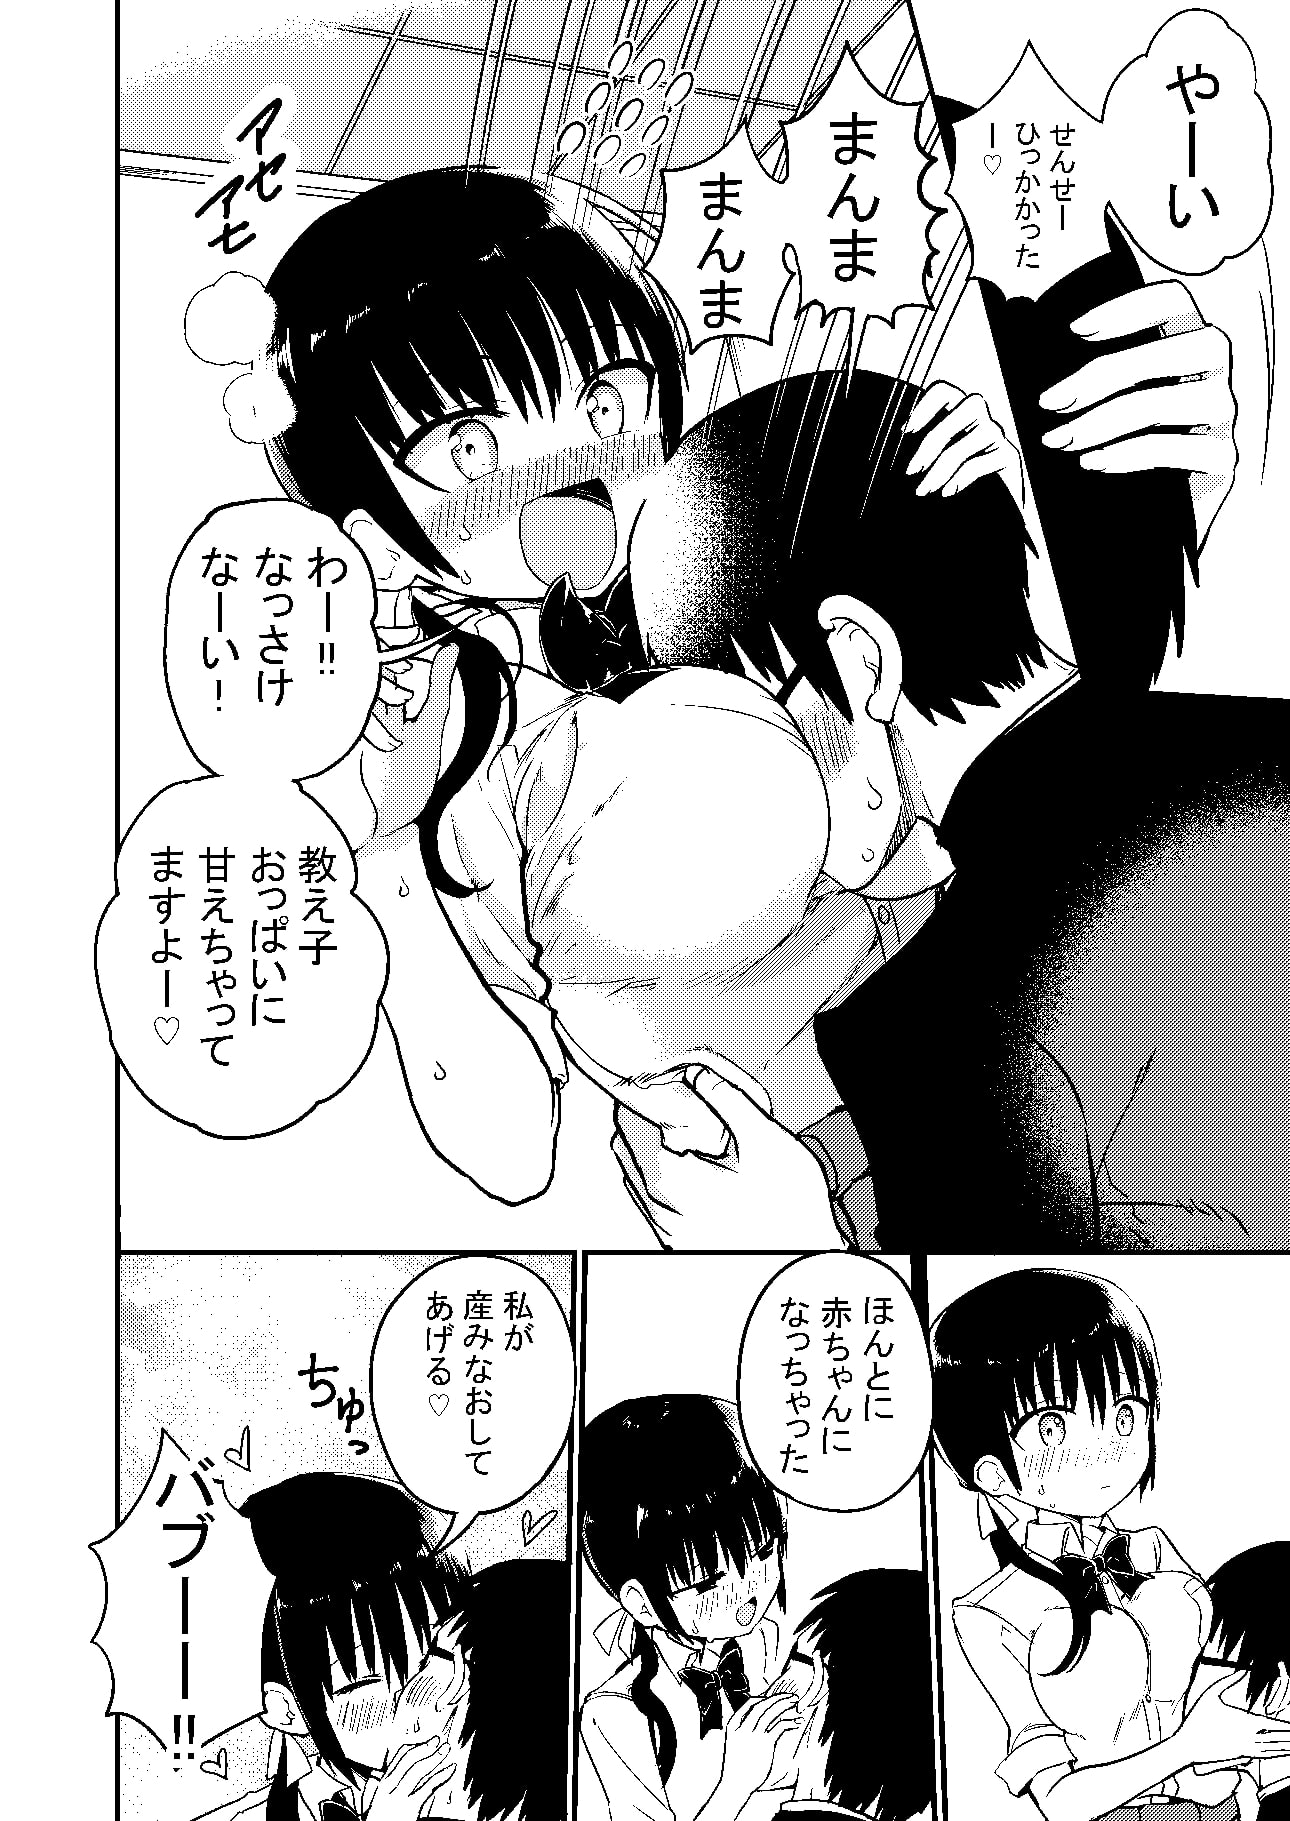 Throwing Whole Life at a Busty Student in Miniskirt, Received by Her with Affection.